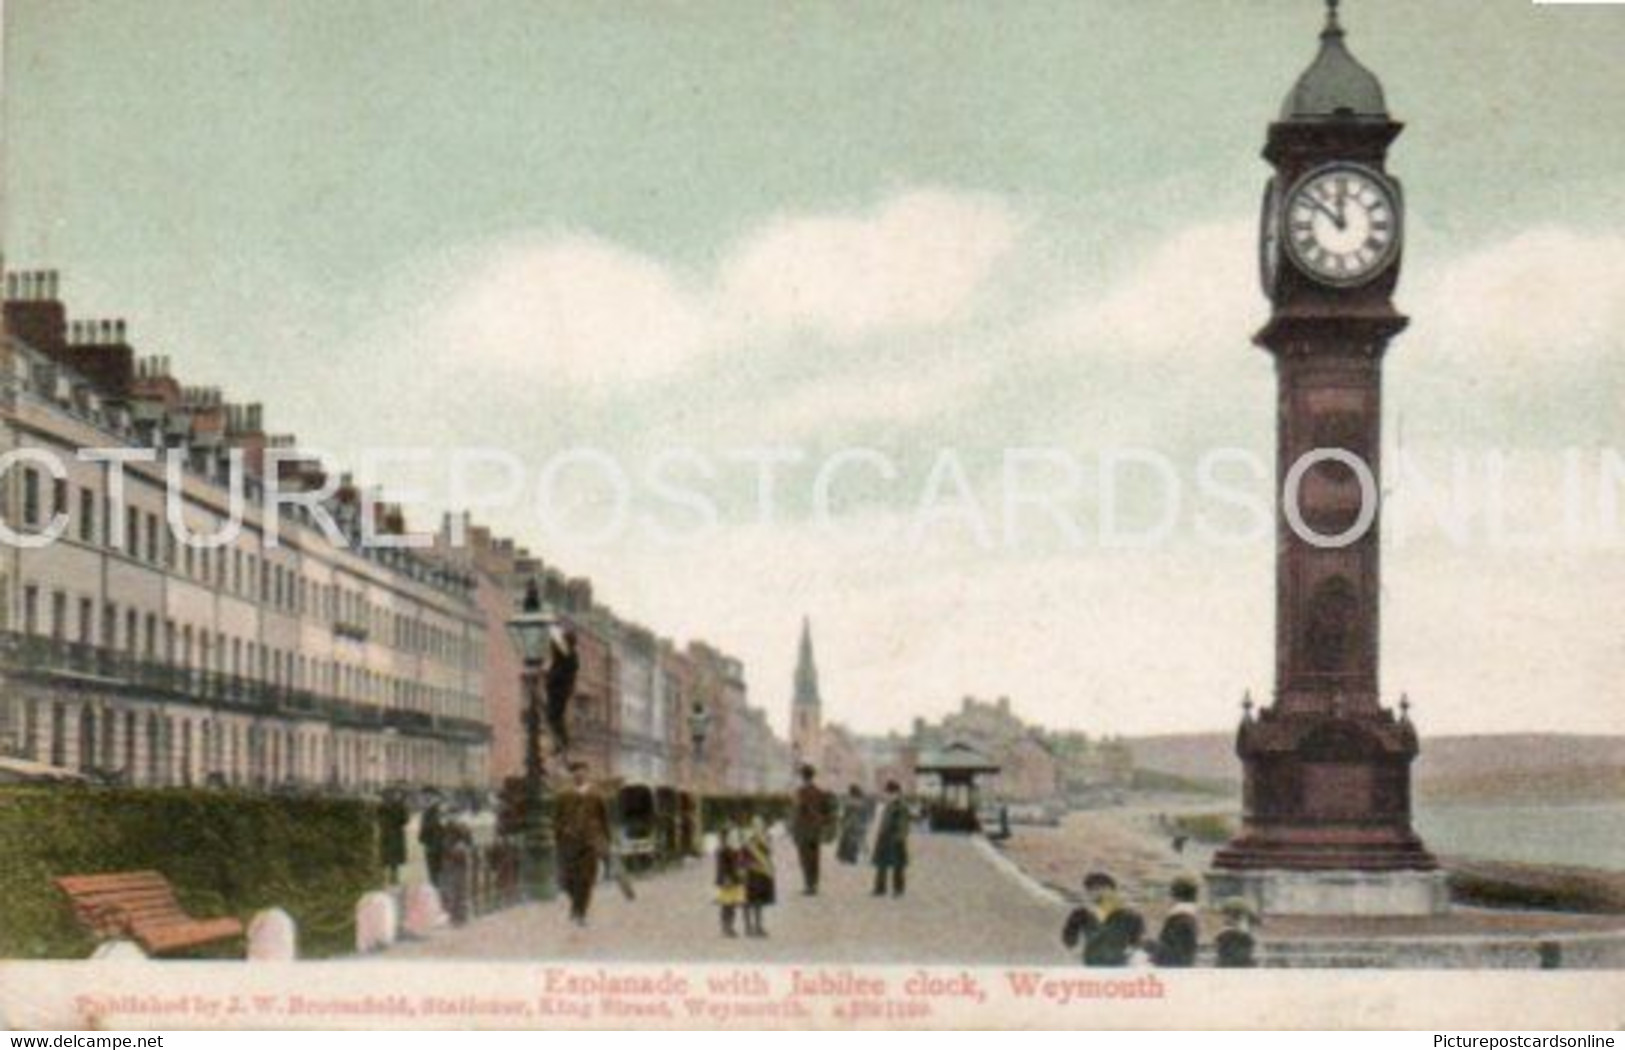 WEYMOUTH ESPLANADE WITH JUBILEE CLOCK OLD COLOUR POSTCARD DORSET - Weymouth